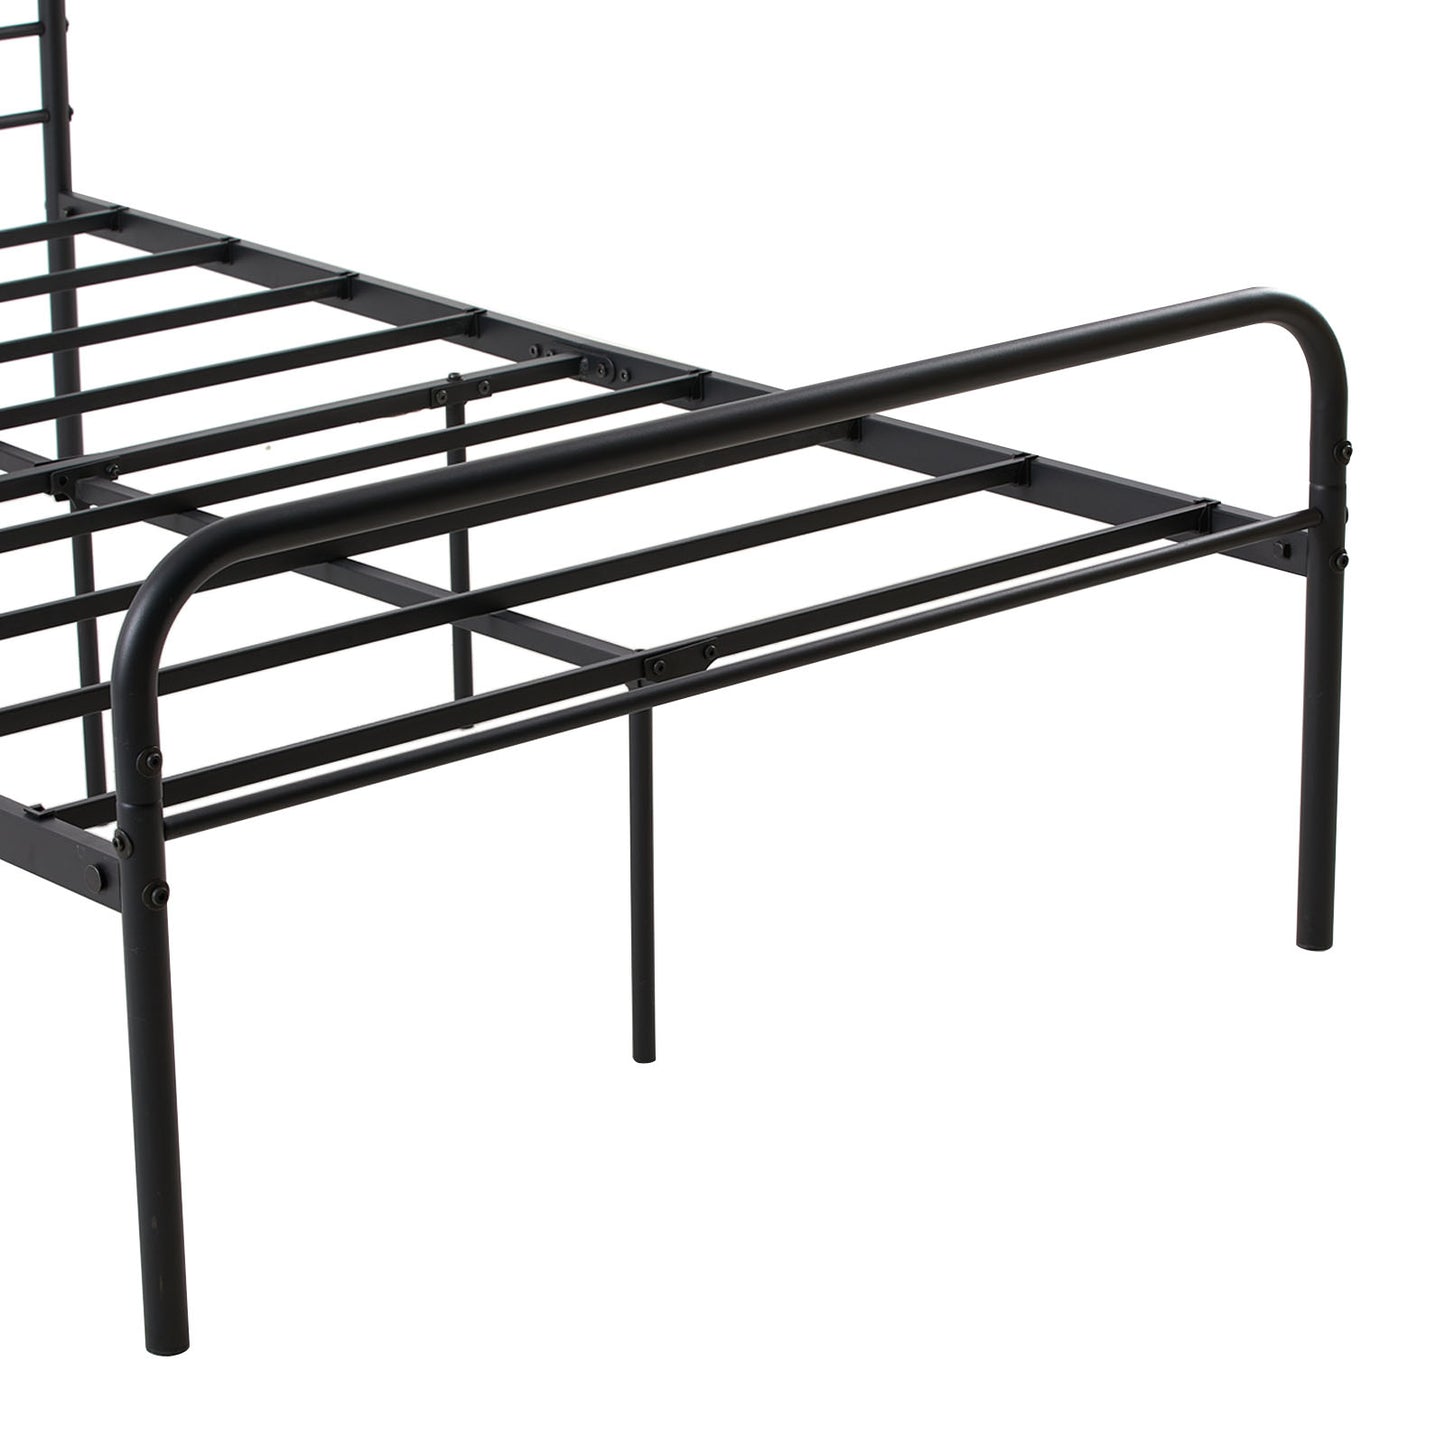 BERRY Small Double Metal Bed 123*196.4 cm - Black